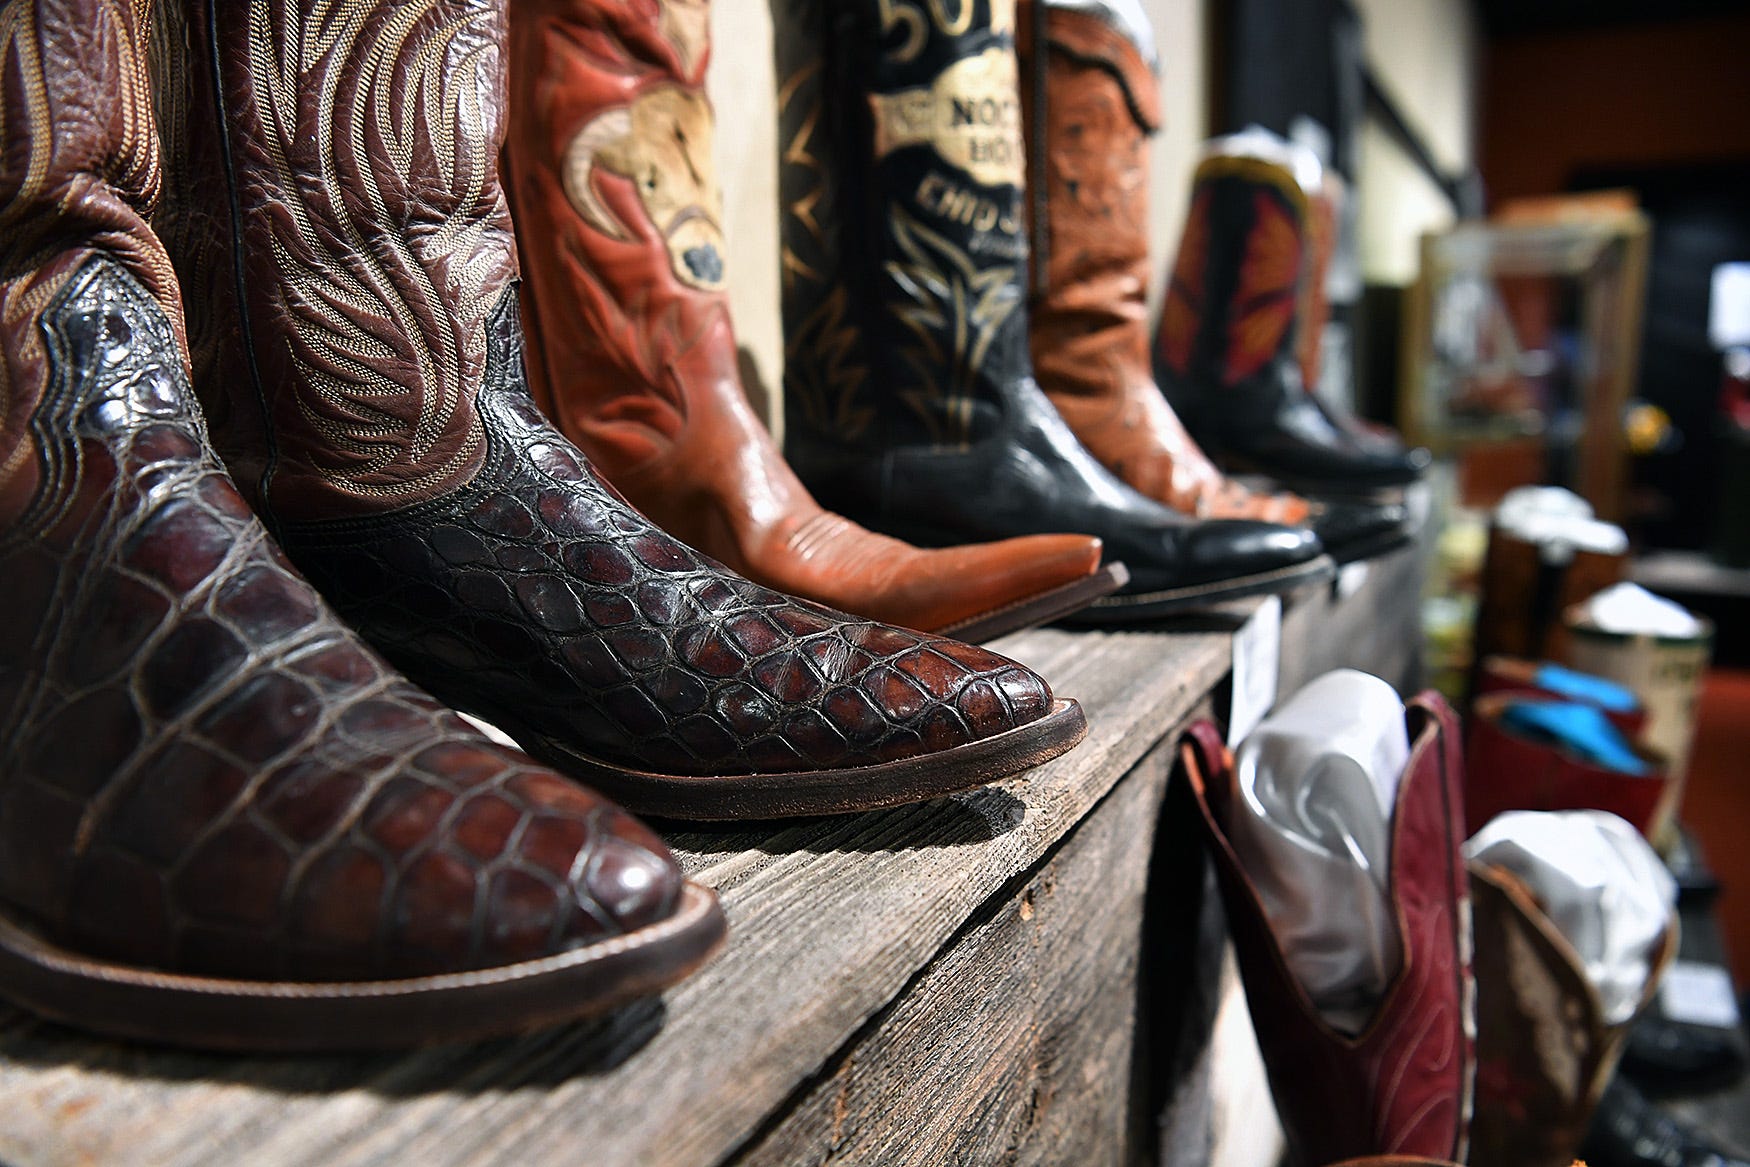 North Texas boot makers highlight of 